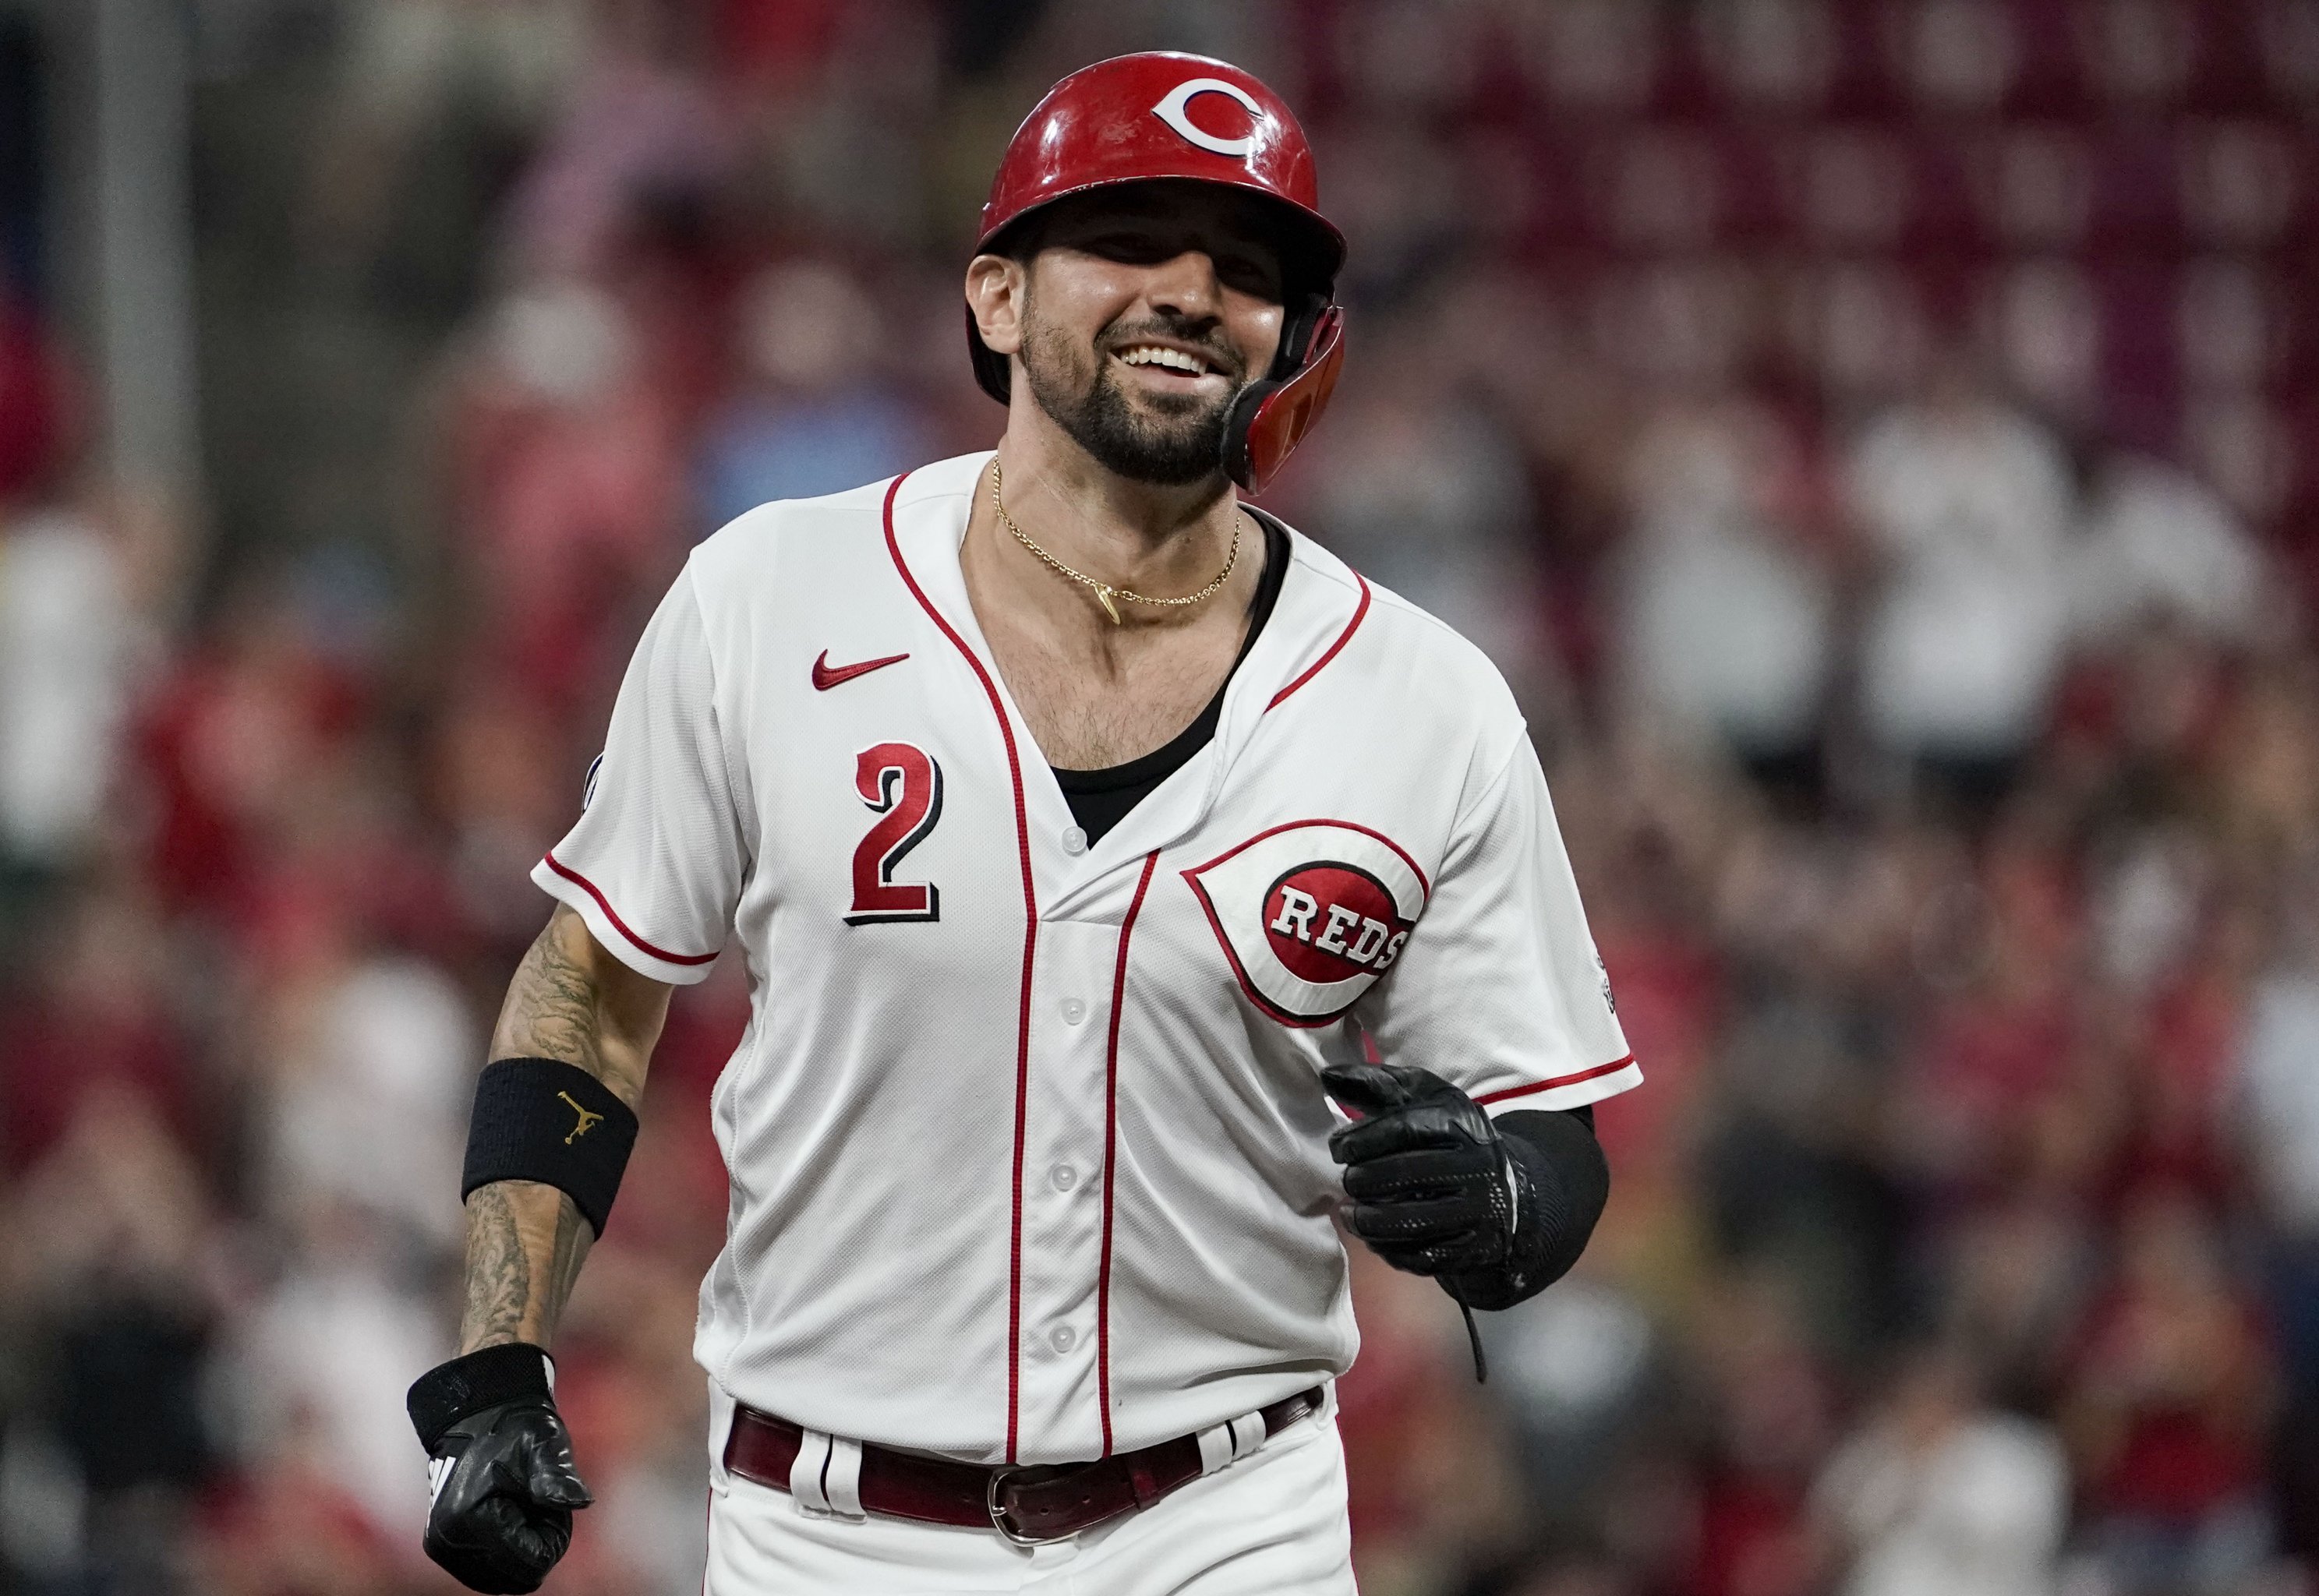 Report: Nick Castellanos signs 4-year deal with Reds